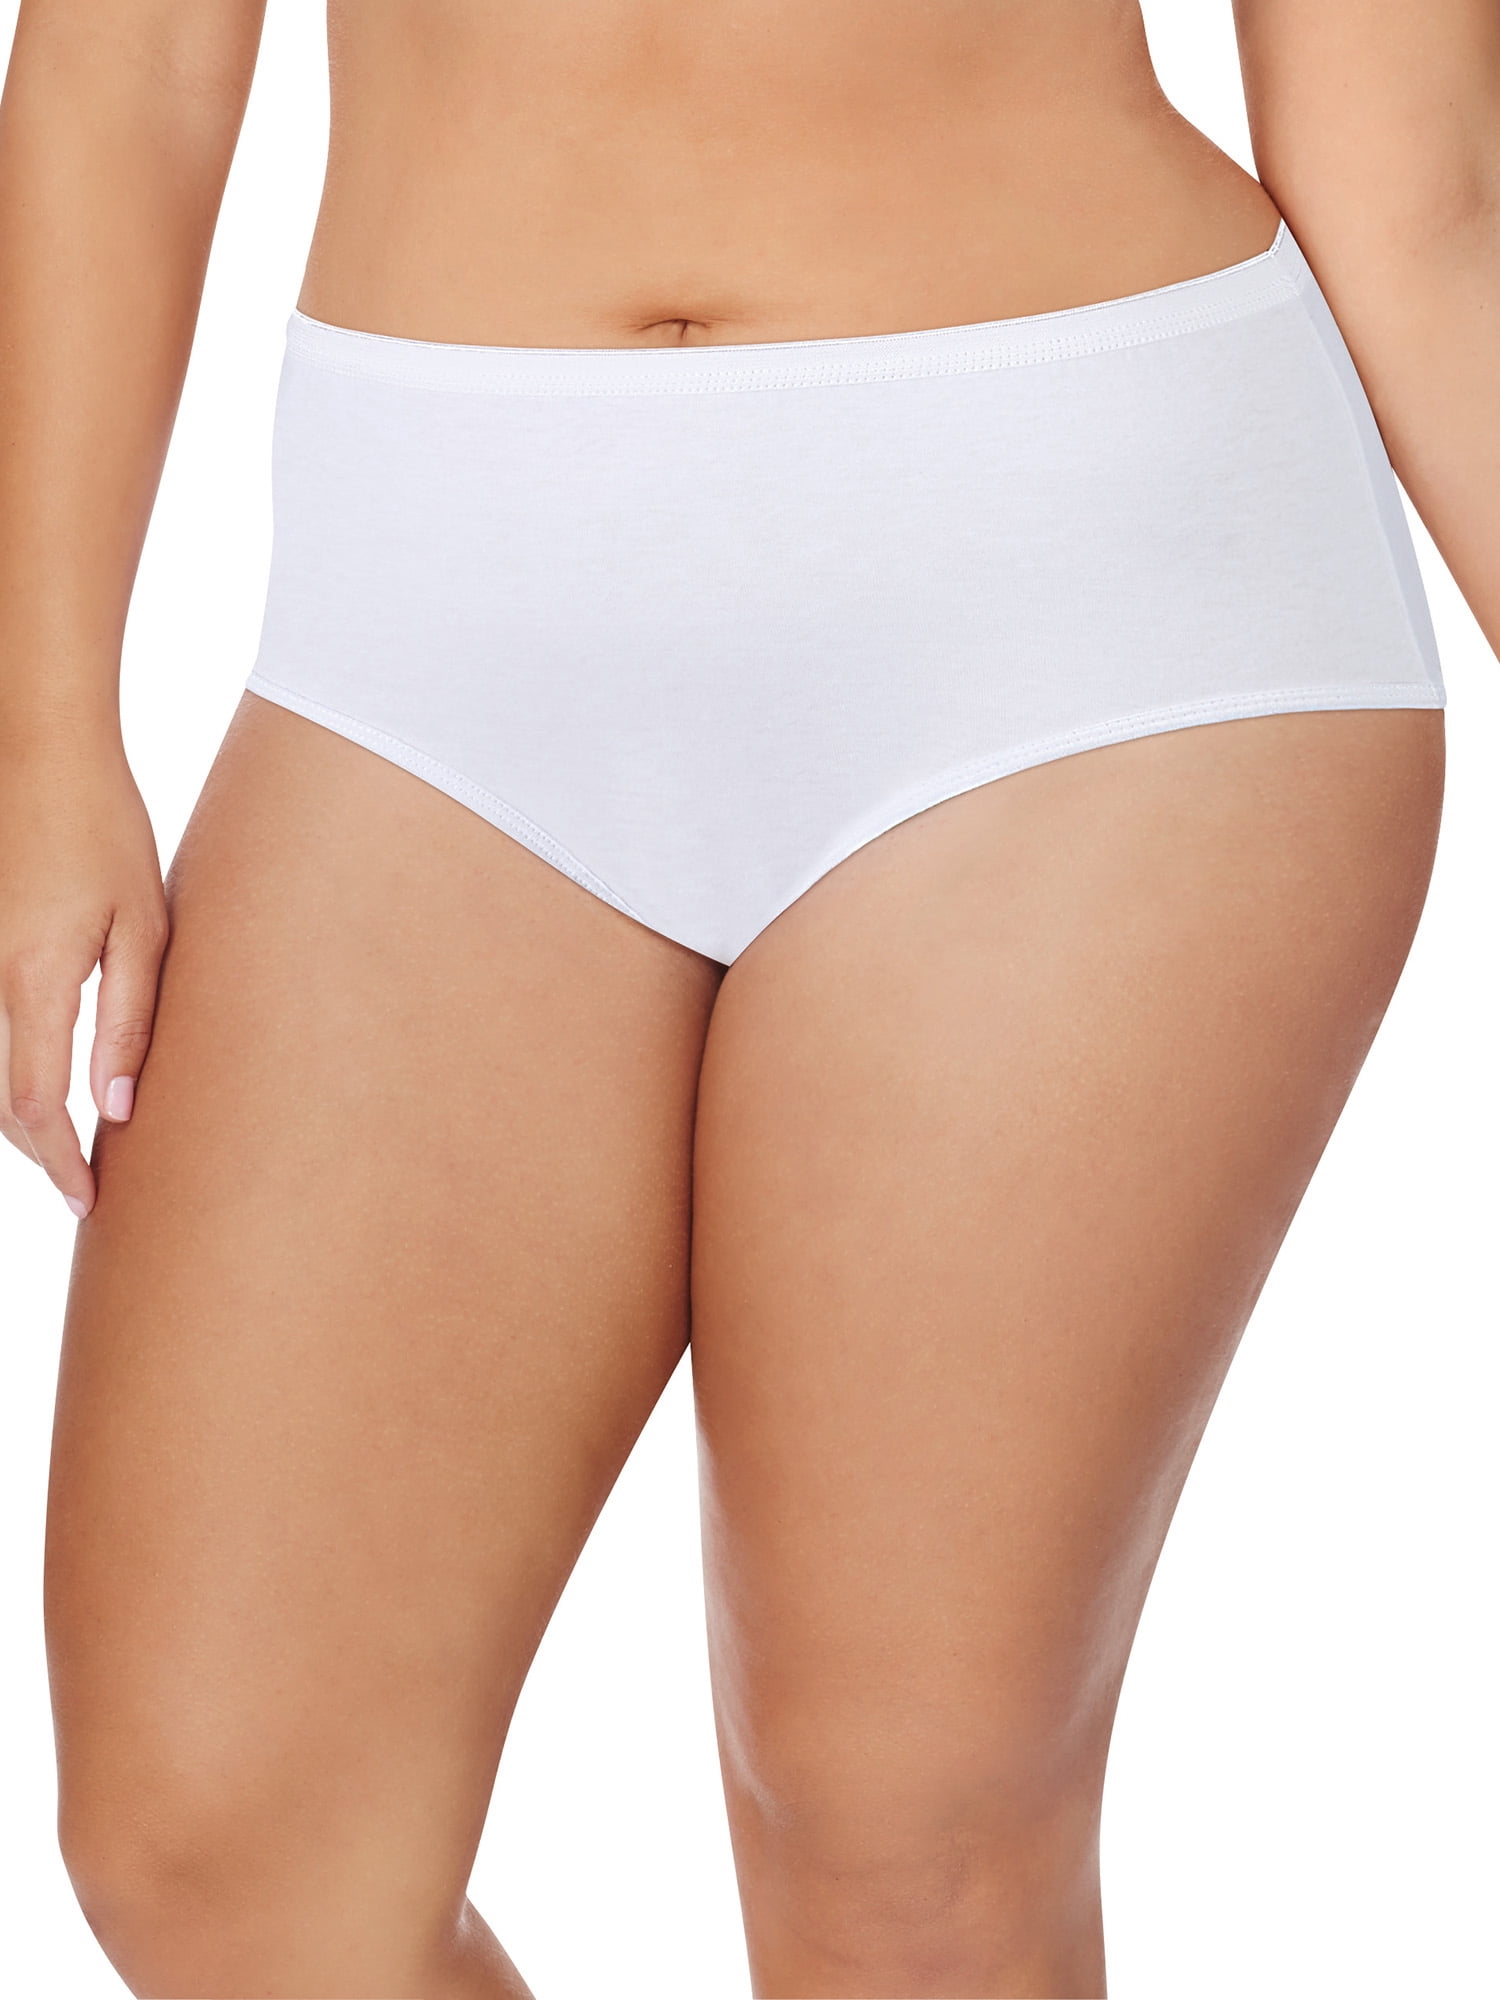 Fit for Me Women's Plus Size White Brief Underwear, 6 Pack, Sizes 9-13